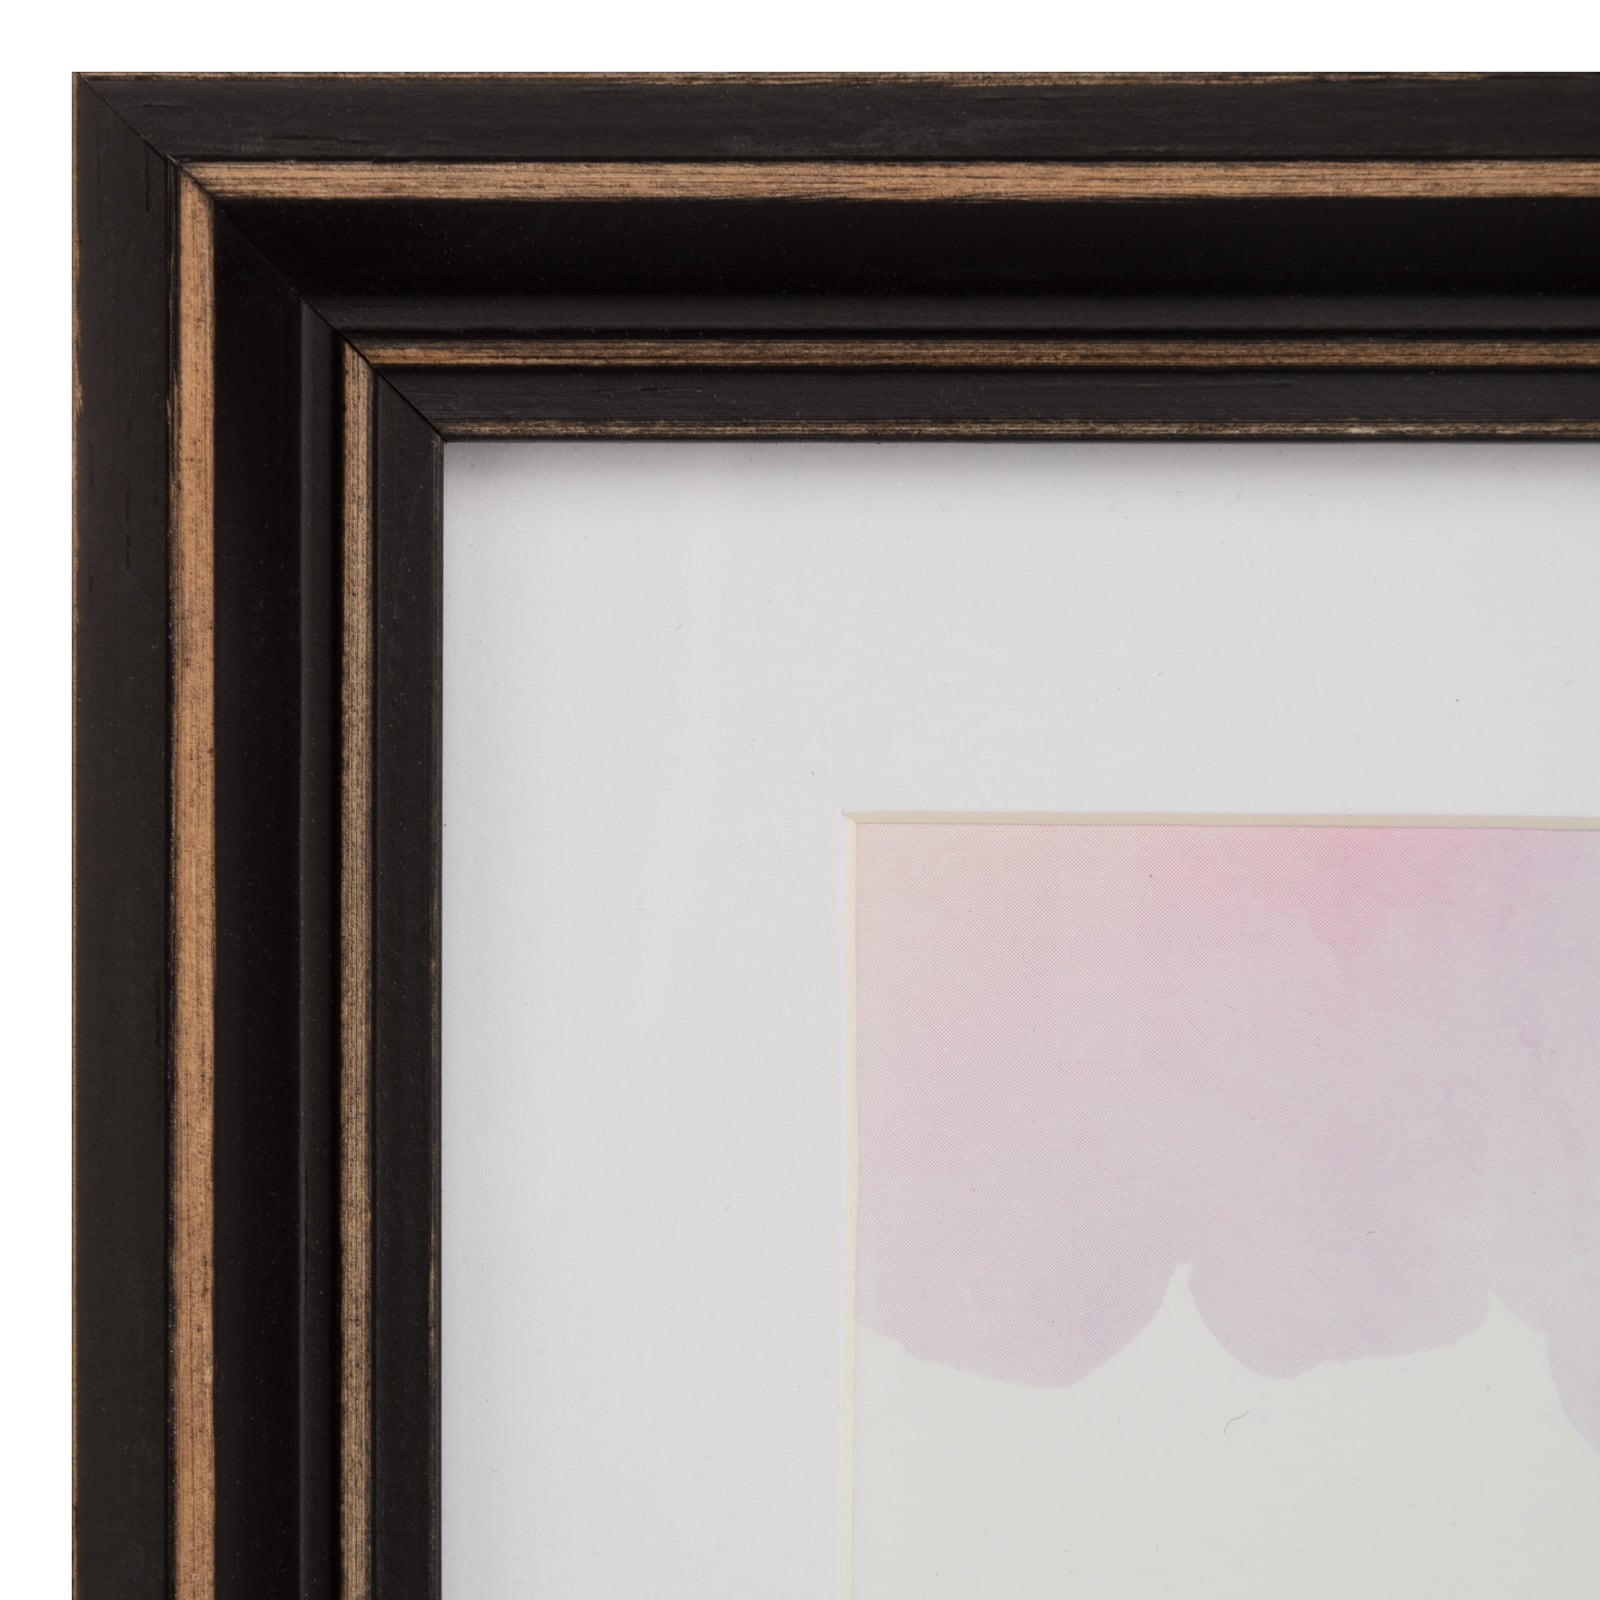 2 Opening Black Distressed 4&#x22; x 6&#x22; Collage Frame, Simply Essentials&#x2122; by Studio D&#xE9;cor&#xAE;